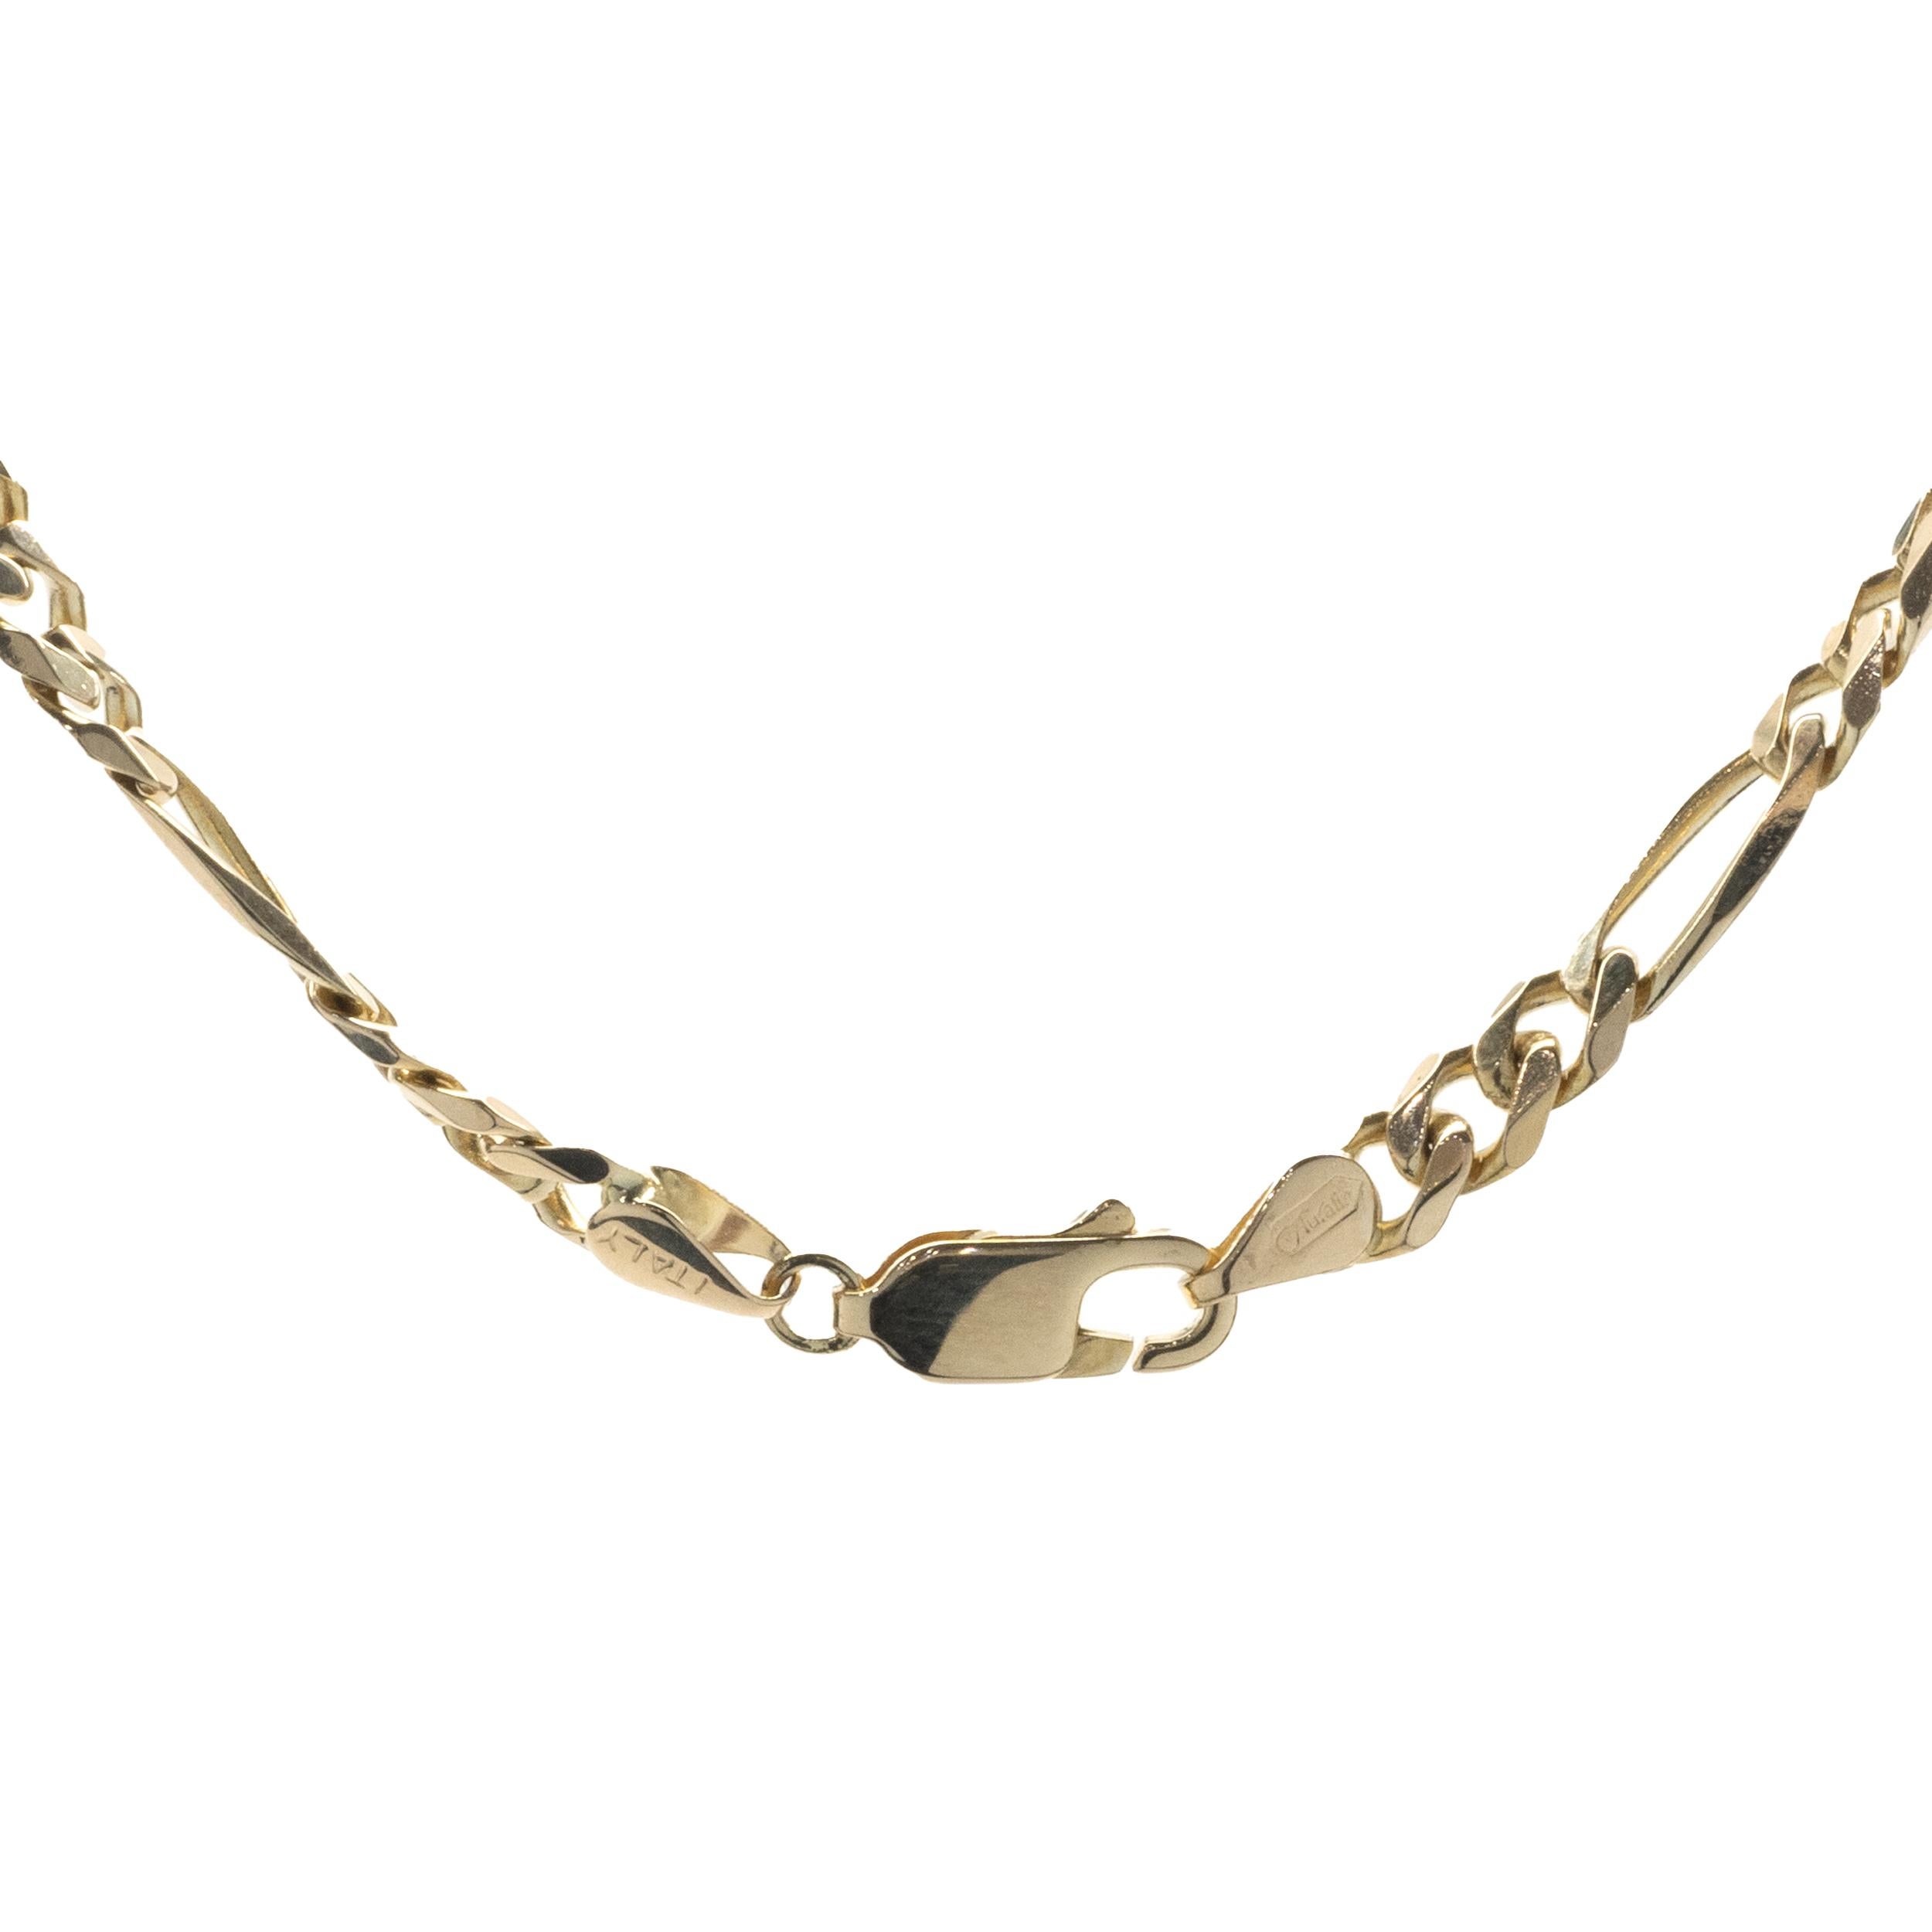 Material: 14K yellow gold
Dimensions: necklace measures 20-inches in length, 4.5mm wide
Weight: 16.90 grams
